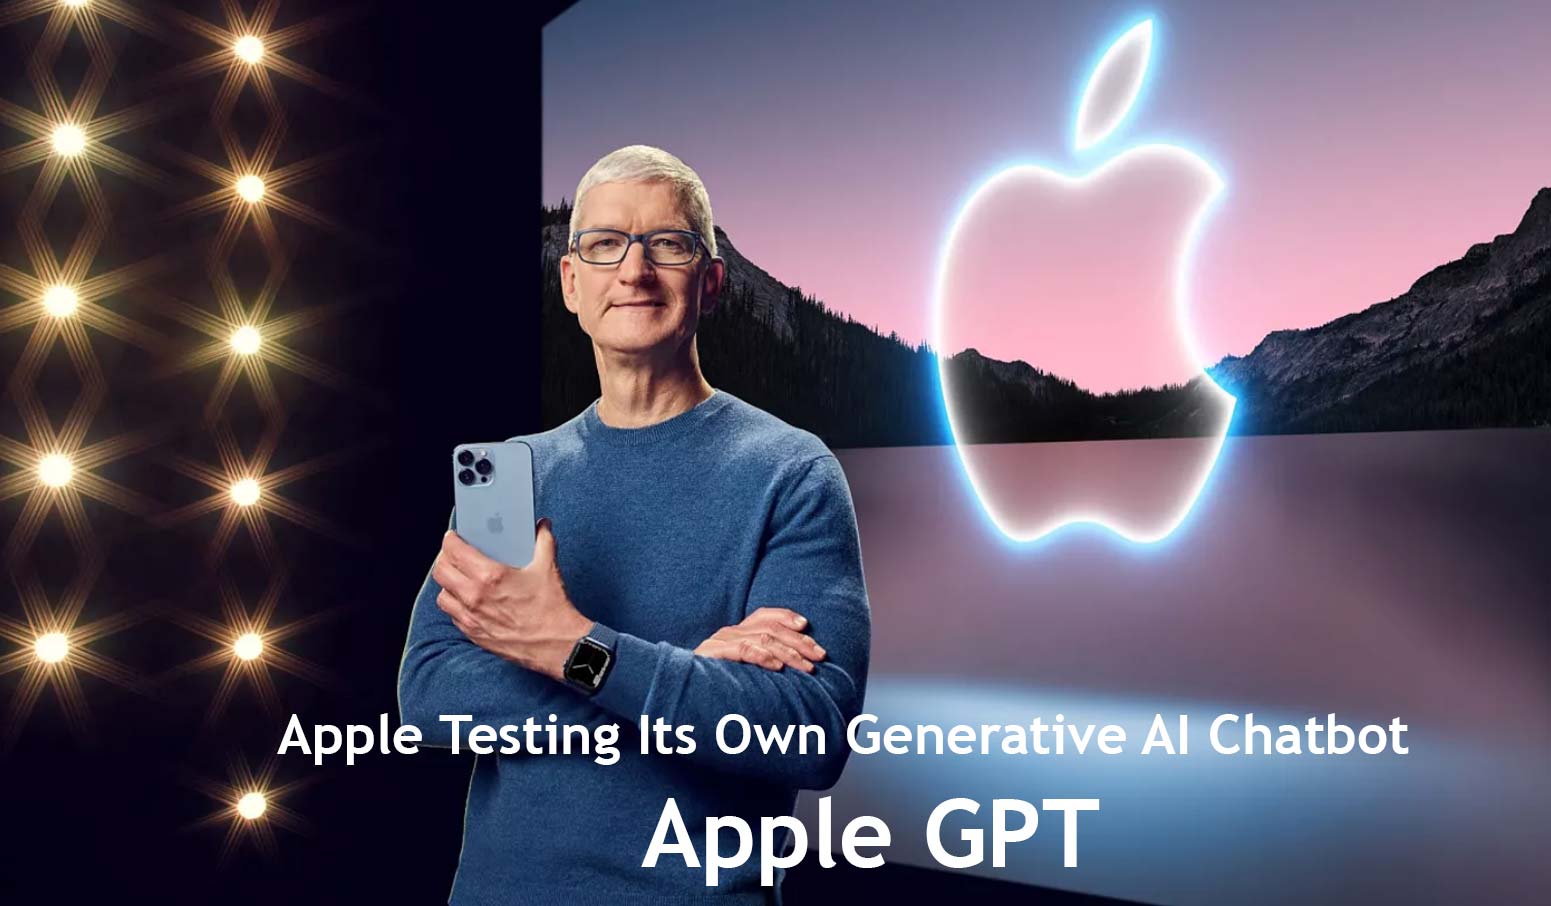 Apple Testing Its Own Generative AI Chatbot, Apple GPT, to Rival OpenAI's ChatGPT